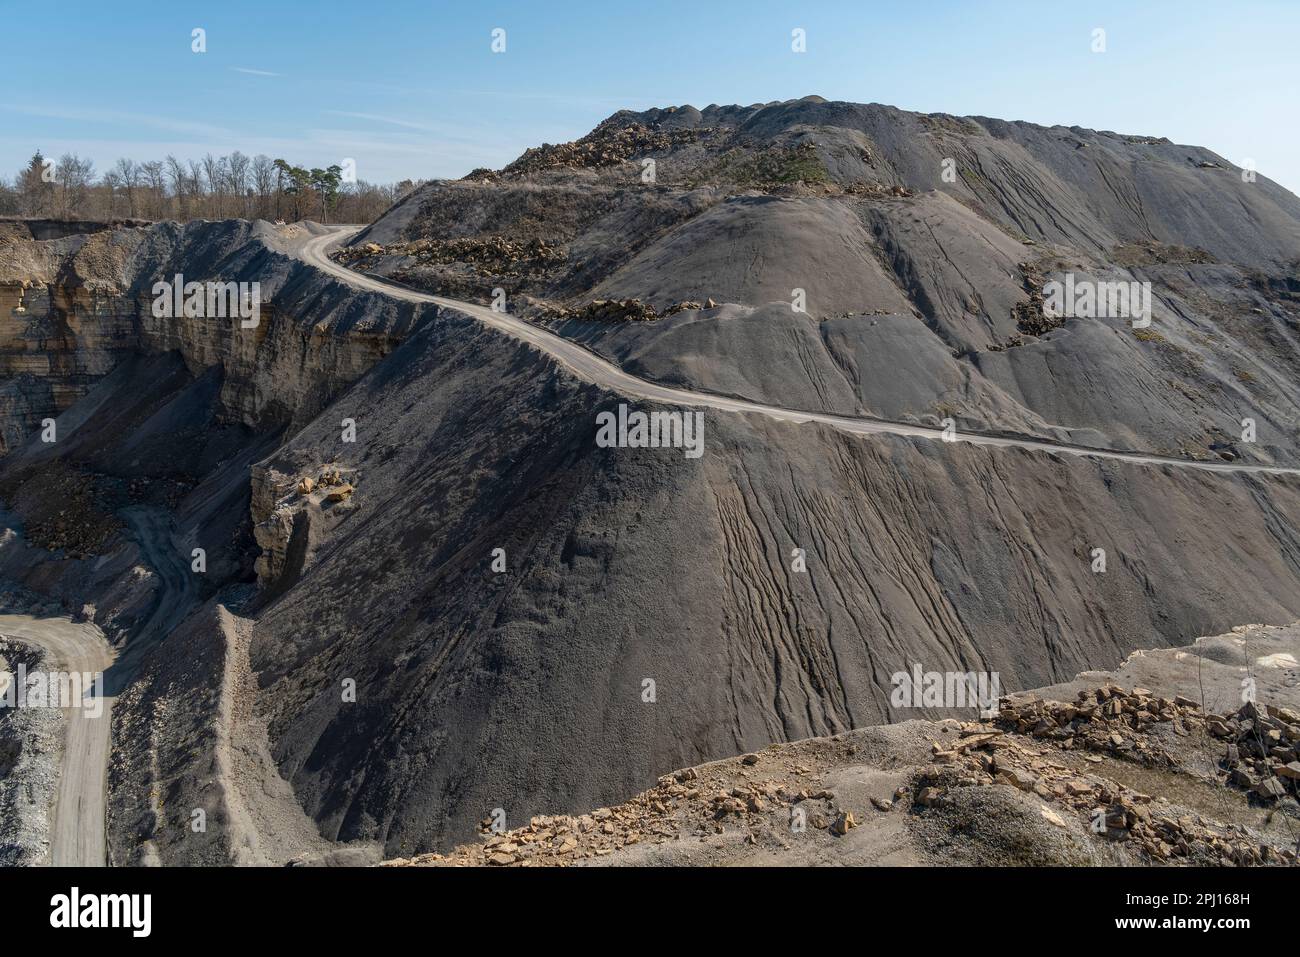 Scenery around a open-pit mine with gravel road, gravel and spoil piles in sunny ambiance Stock Photo